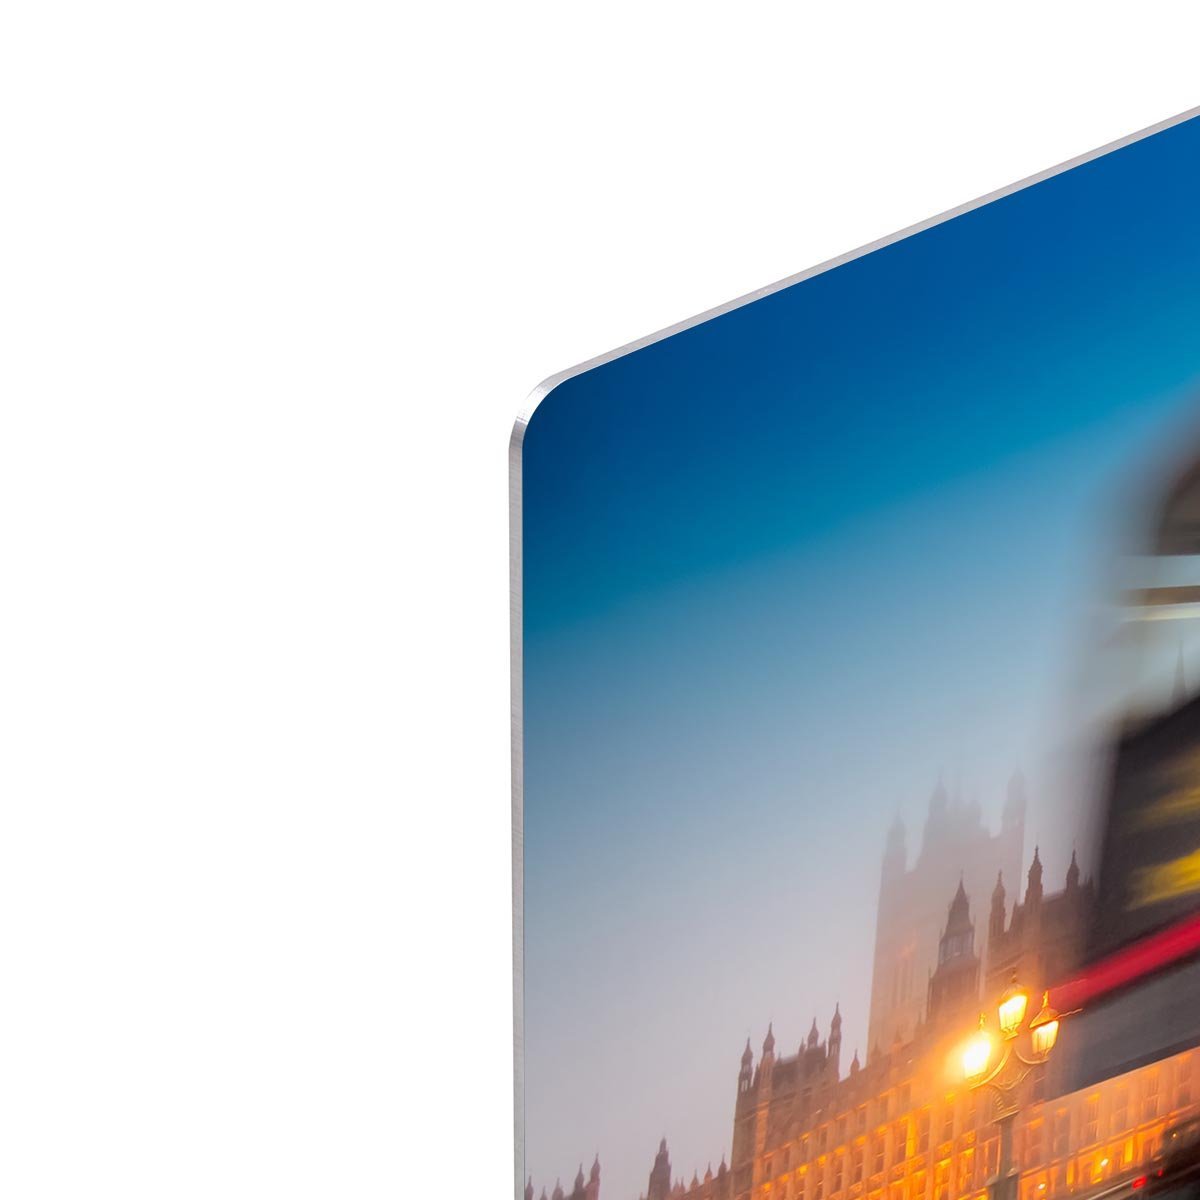 Houses Of Parliament red double-decker bus HD Metal Print